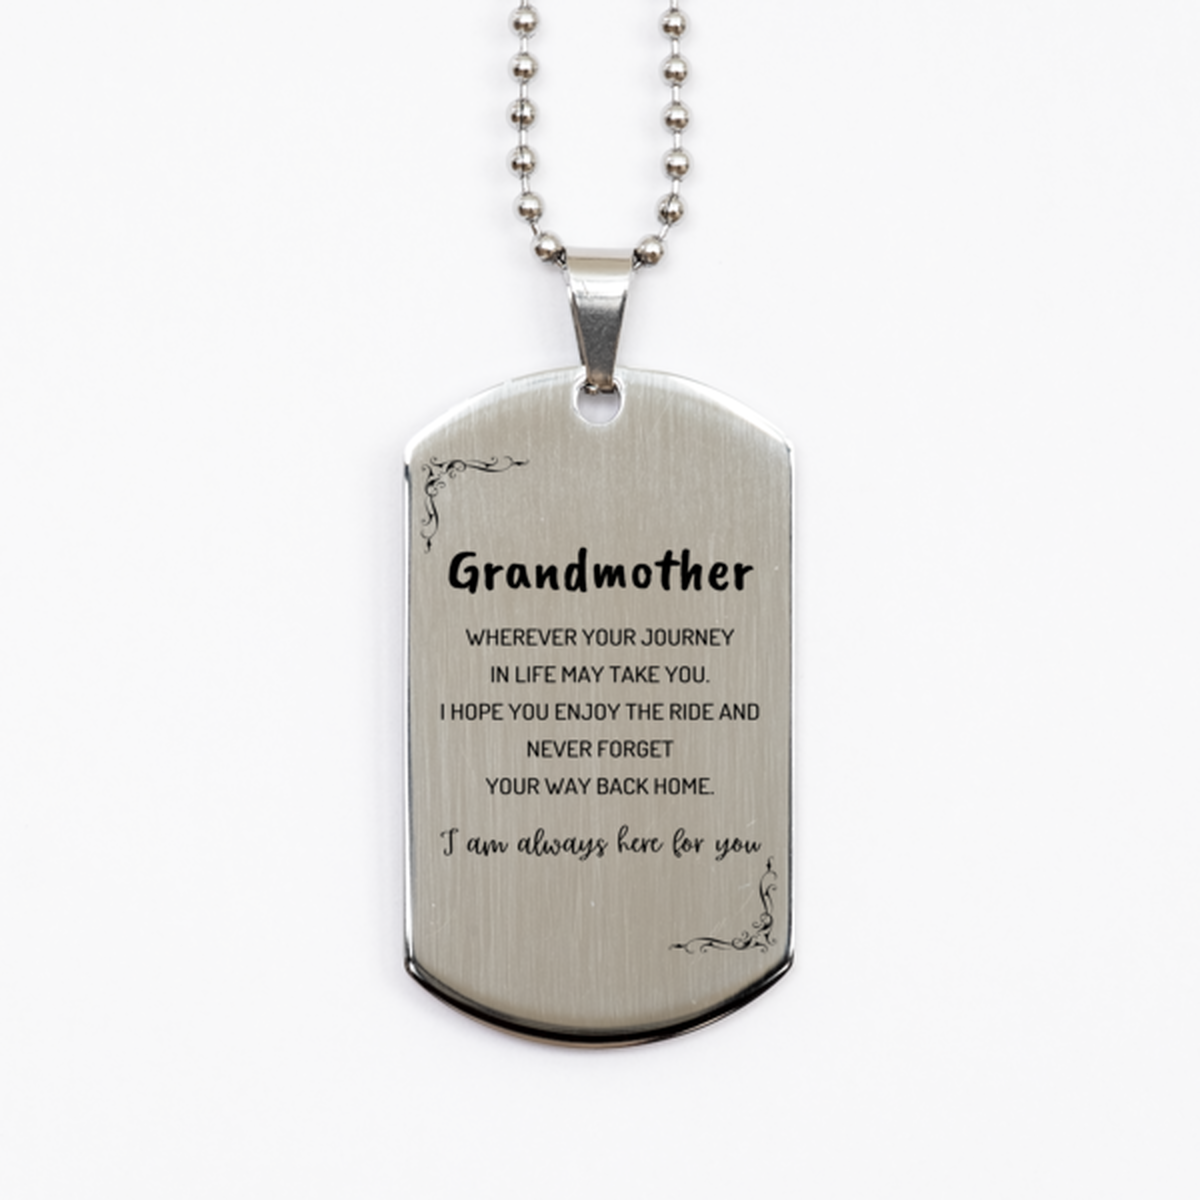 Grandmother wherever your journey in life may take you, I am always here for you Grandmother Silver Dog Tag, Awesome Christmas Gifts For Grandmother, Grandmother Birthday Gifts for Men Women Family Loved One